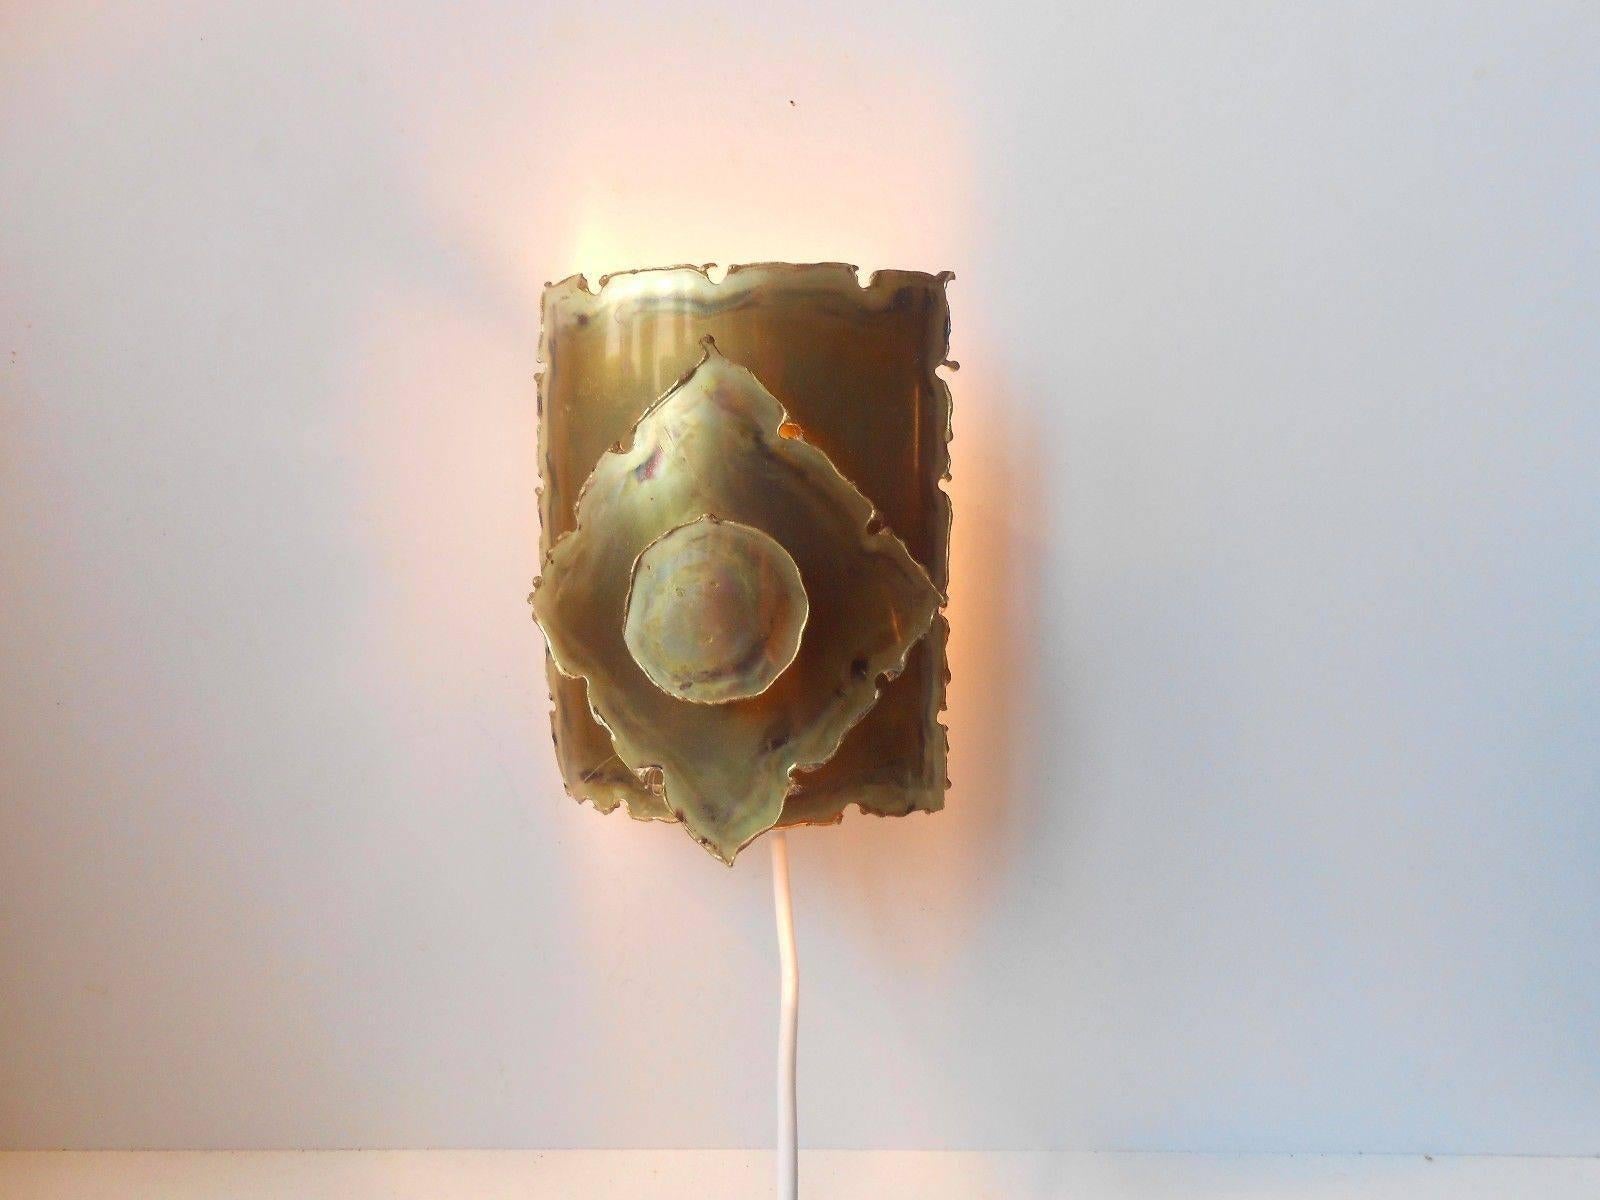 Torch cut, acid treated and patinated wall sconce manufactured by Holm-Sorensen Belysning, Copenhagen, circa 1960. Measurements: H 7.25, W 5.75 inches. Condition: Near mint.